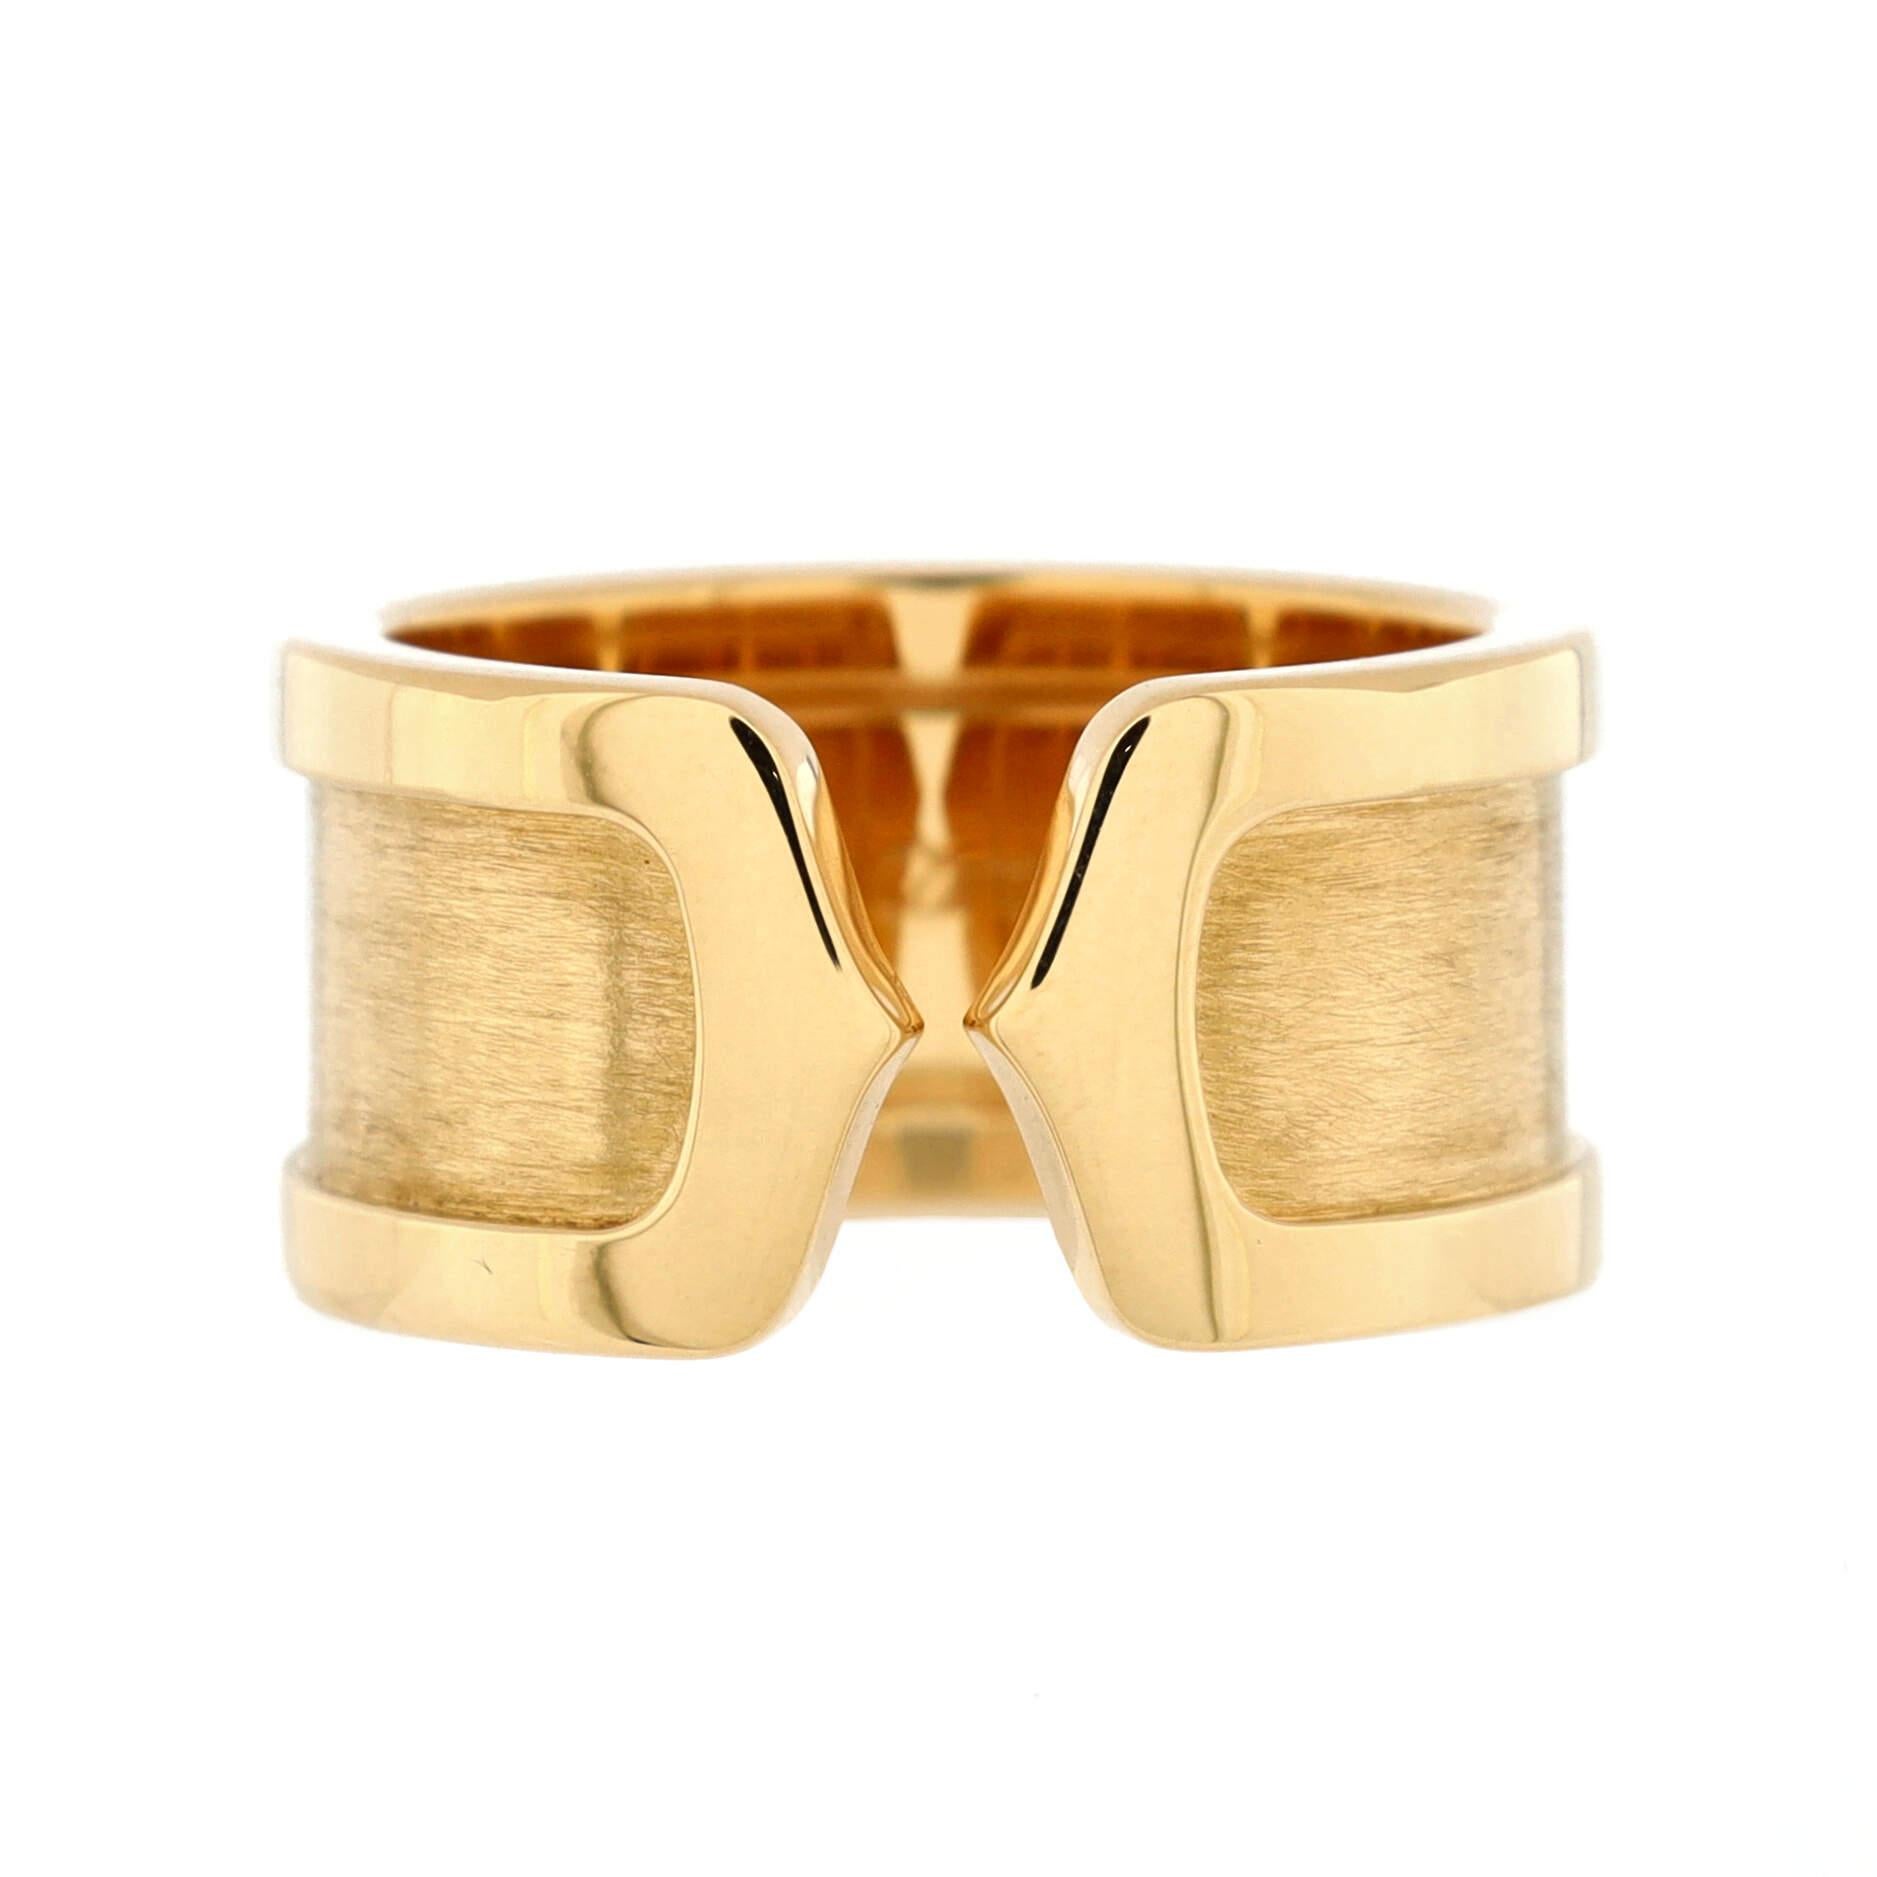 Condition: Great. Minor wear throughout.
Accessories: No Accessories
Measurements: Size: 5.25 - 50, Width: 10 mm
Designer: Cartier
Model: C de Cartier Ring 18K Yellow Gold 10mm
Exterior Color: Yellow Gold
Item Number: 225855/7